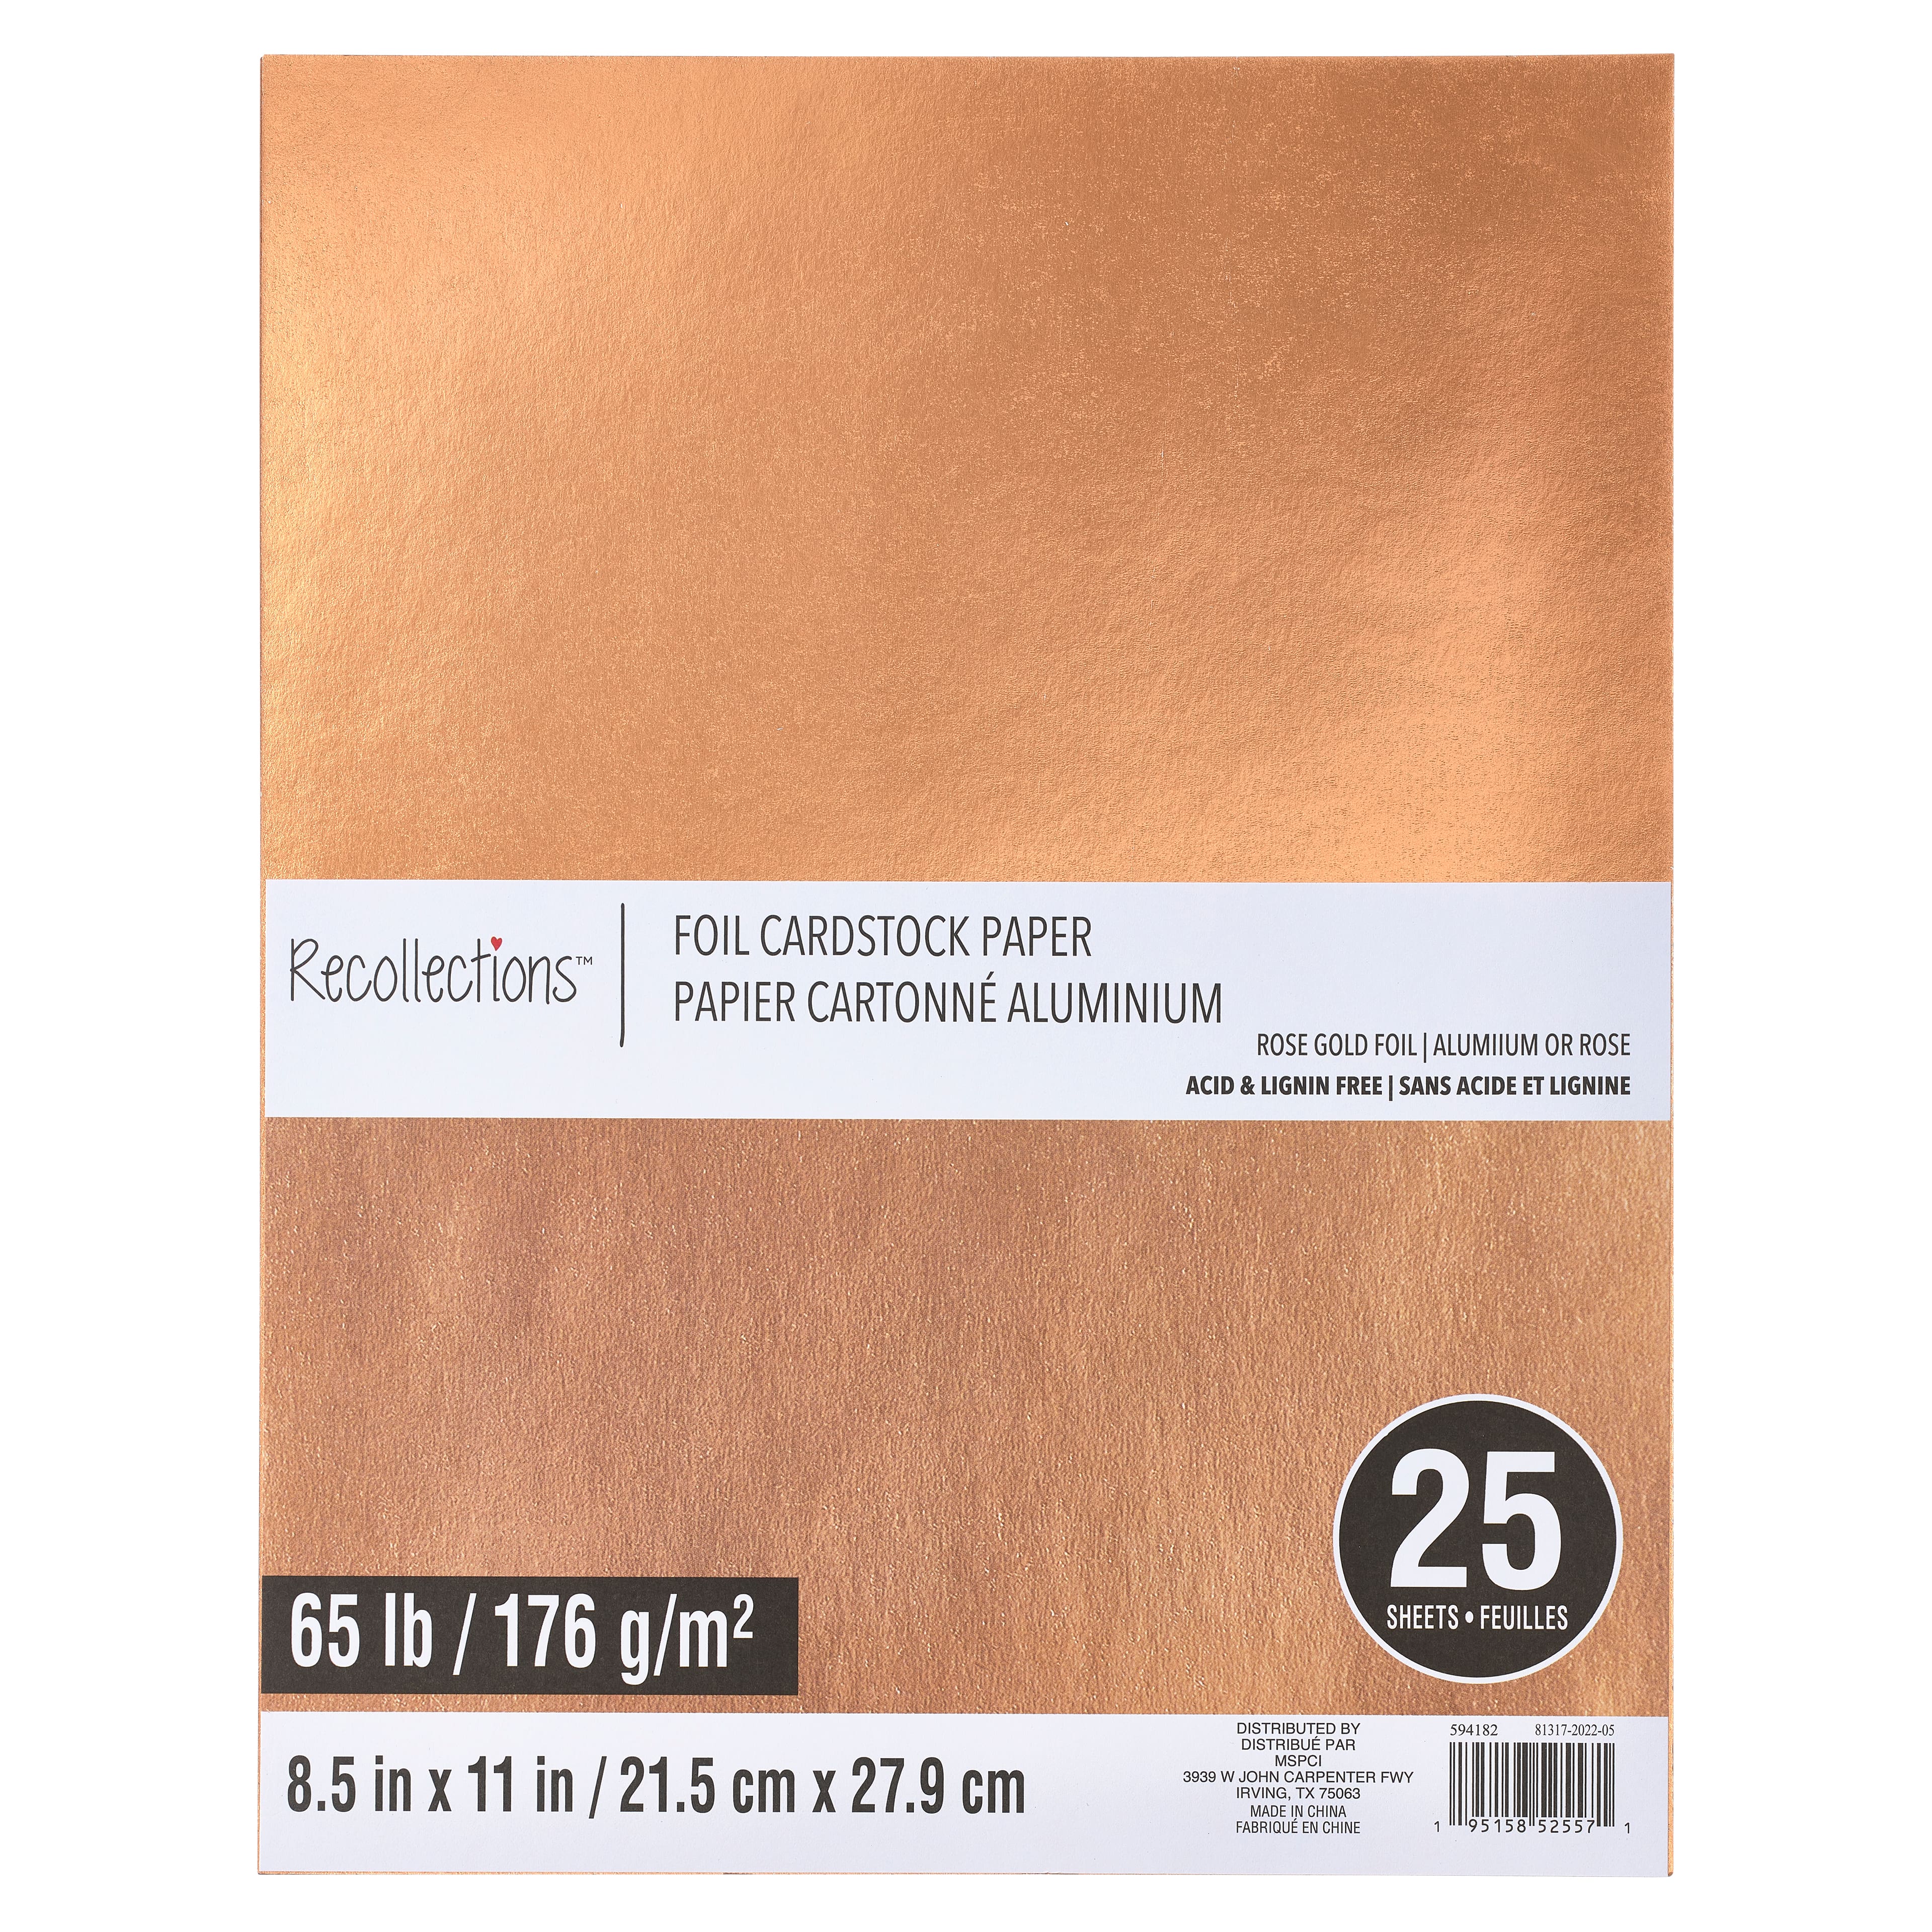 Recollections Foil Cardstock Paper - Holographic 25ct Sheets